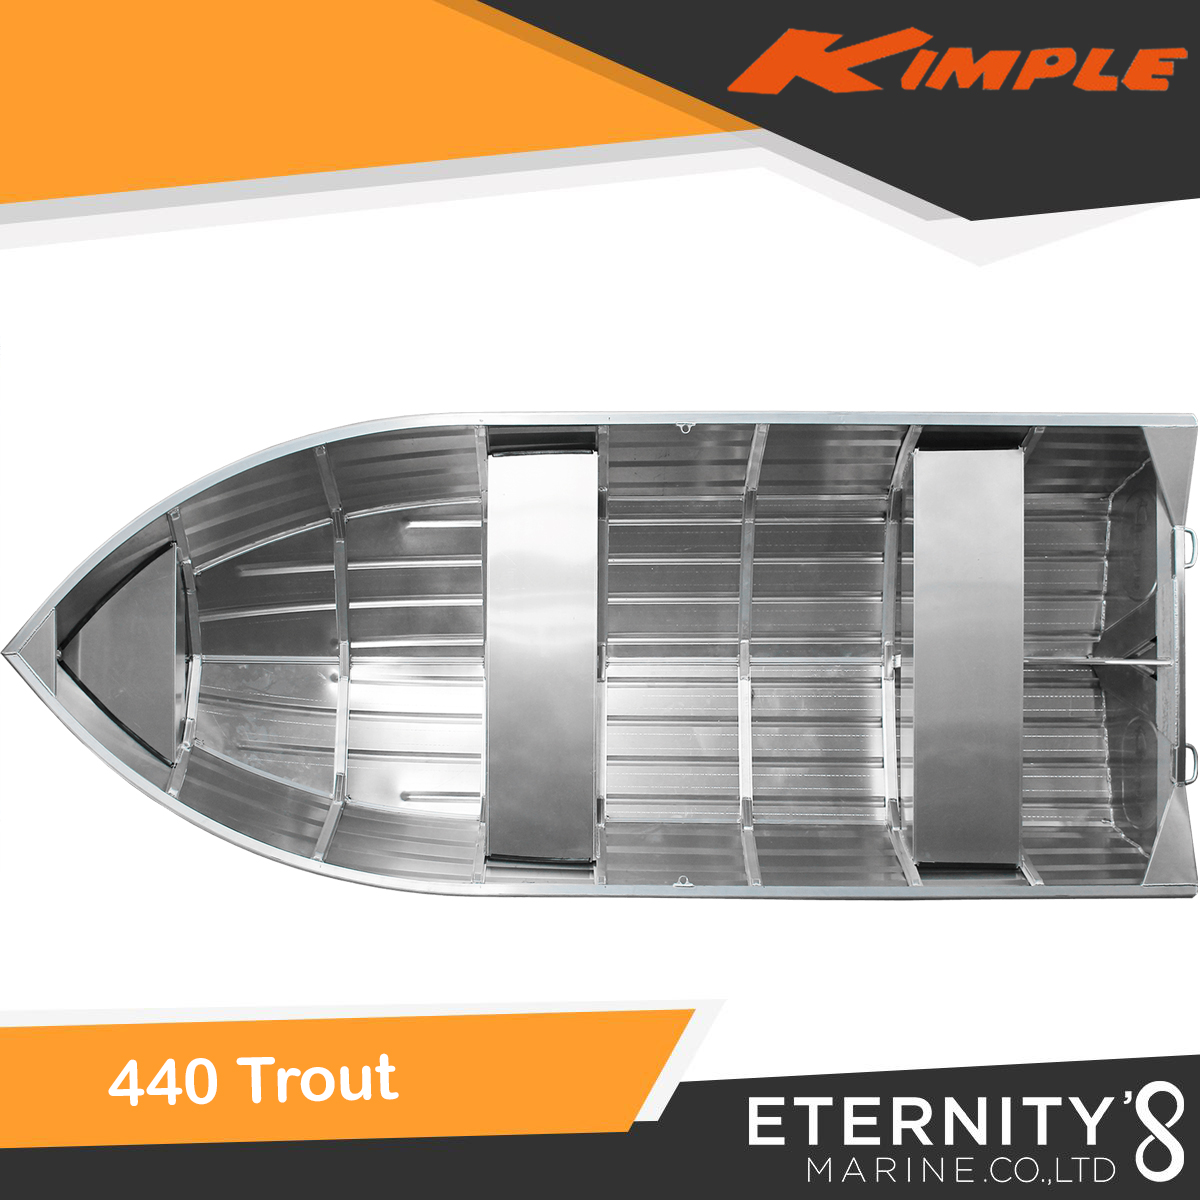 Kimple 440 Trout